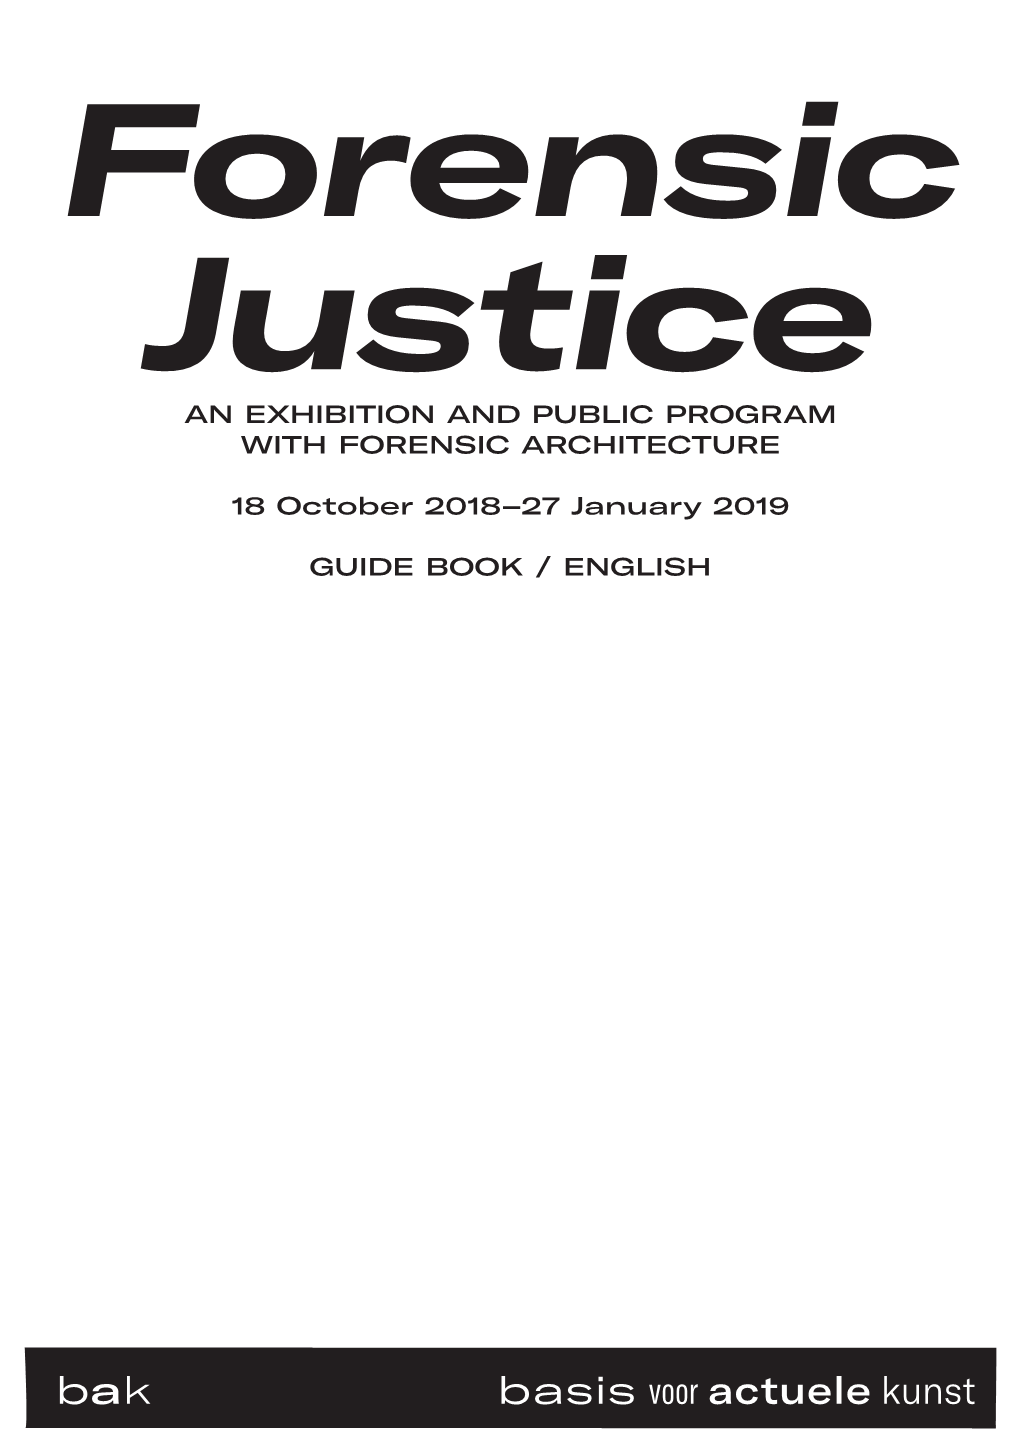 Forensic Justice an EXHIBITION and PUBLIC PROGRAM with FORENSIC ARCHITECTURE